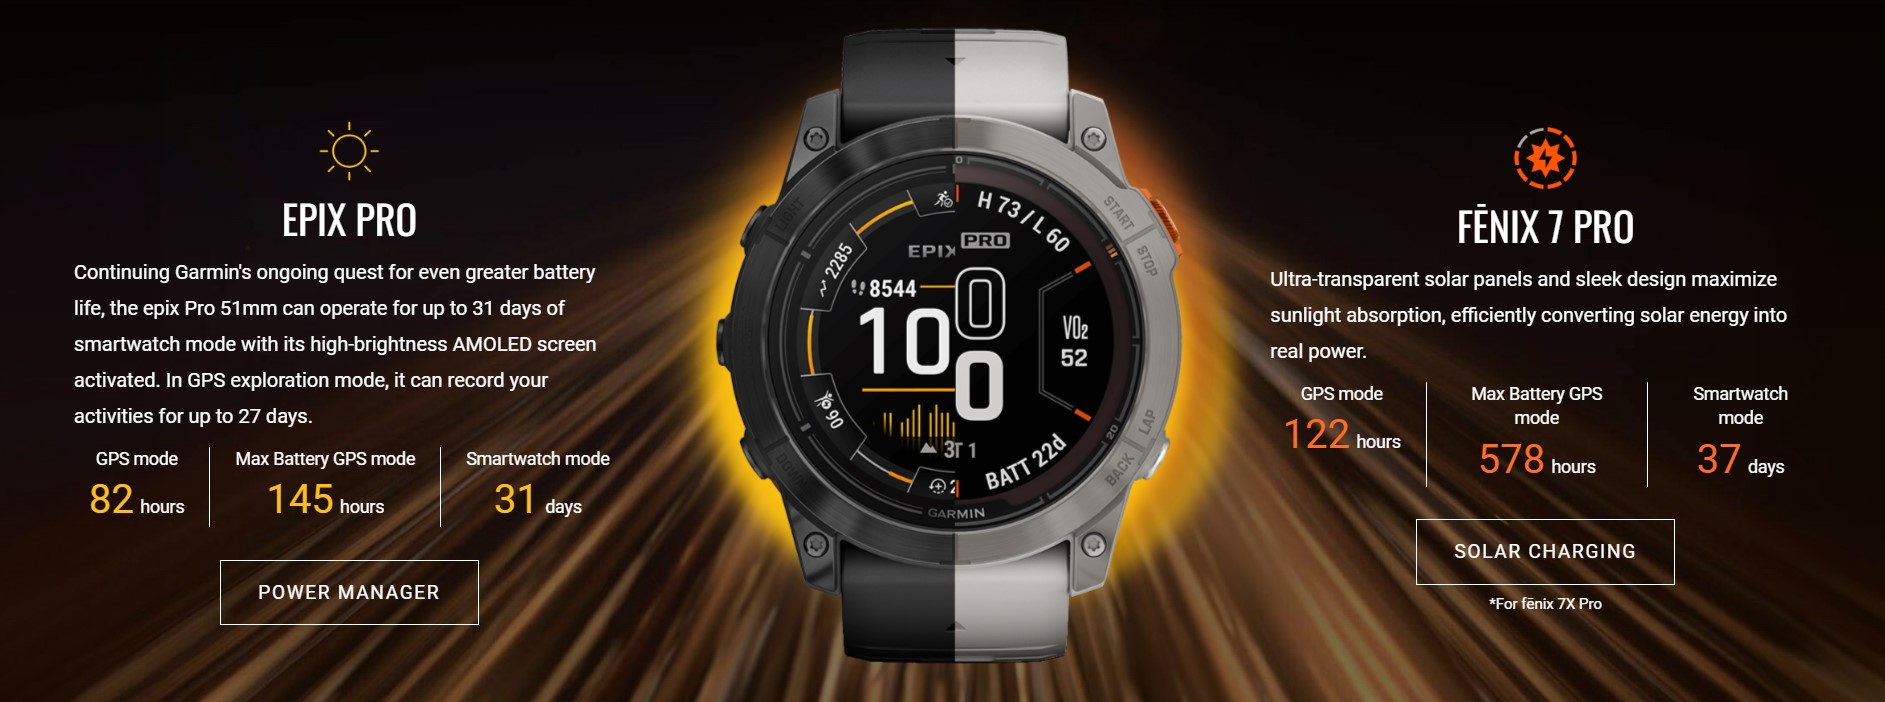 Garmin Launches Fēnix 7 Pro Series & Epix Pro (Gen 2) Series Smartwatches in India - Packed with Features for Outdoor Enthusiasts - Tech News - Before You Take